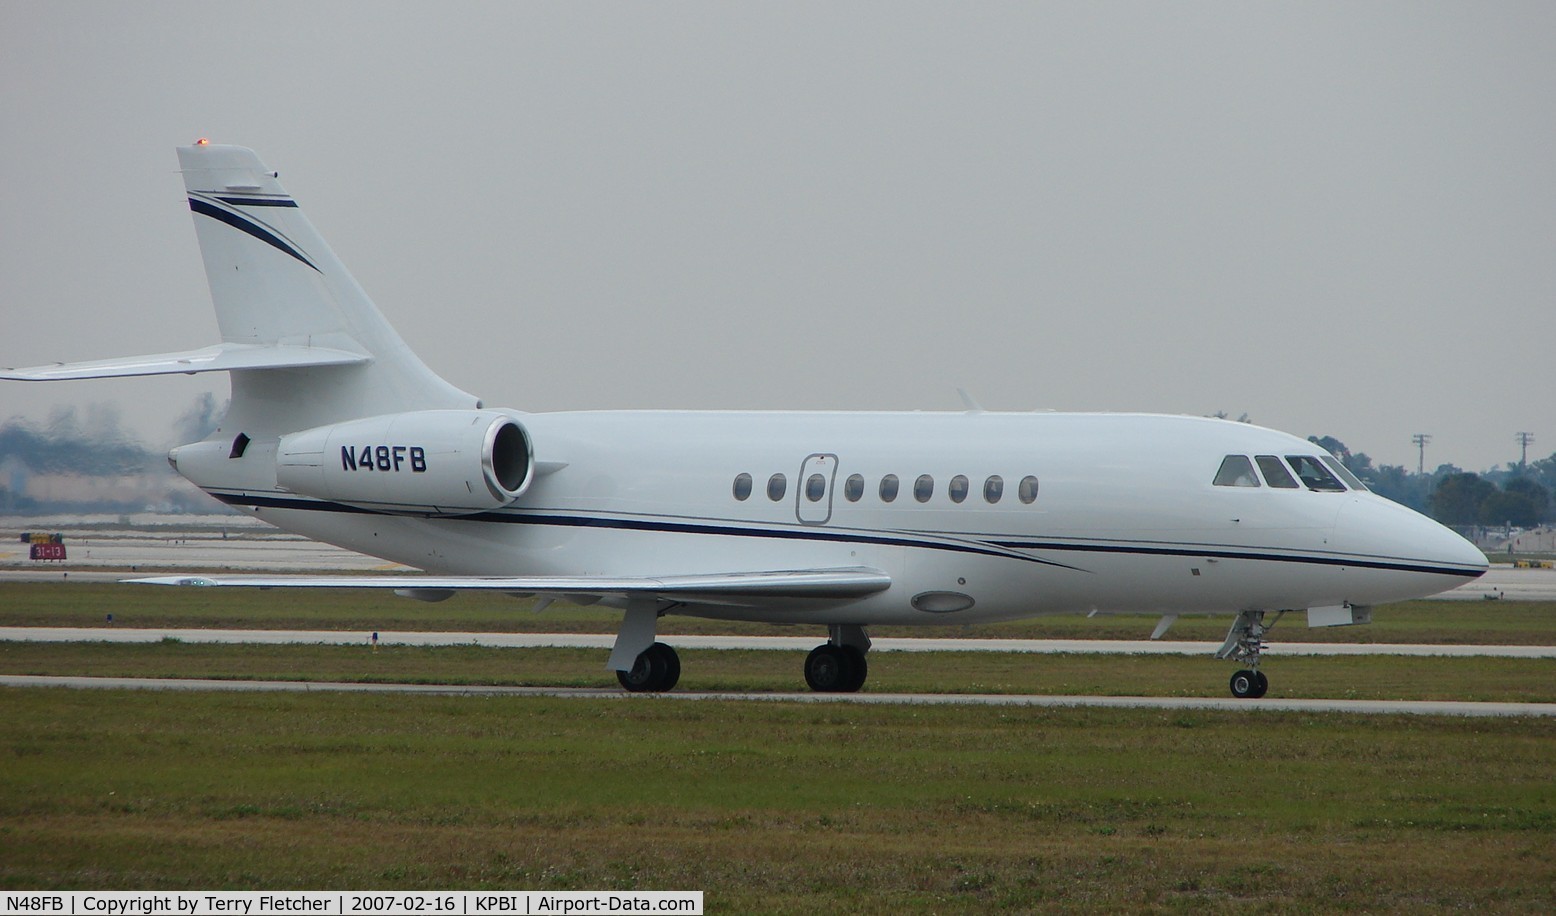 N48FB, 1995 Dassault Falcon 2000 C/N 11, part of the Friday afternoon arrivals 'rush' at PBI